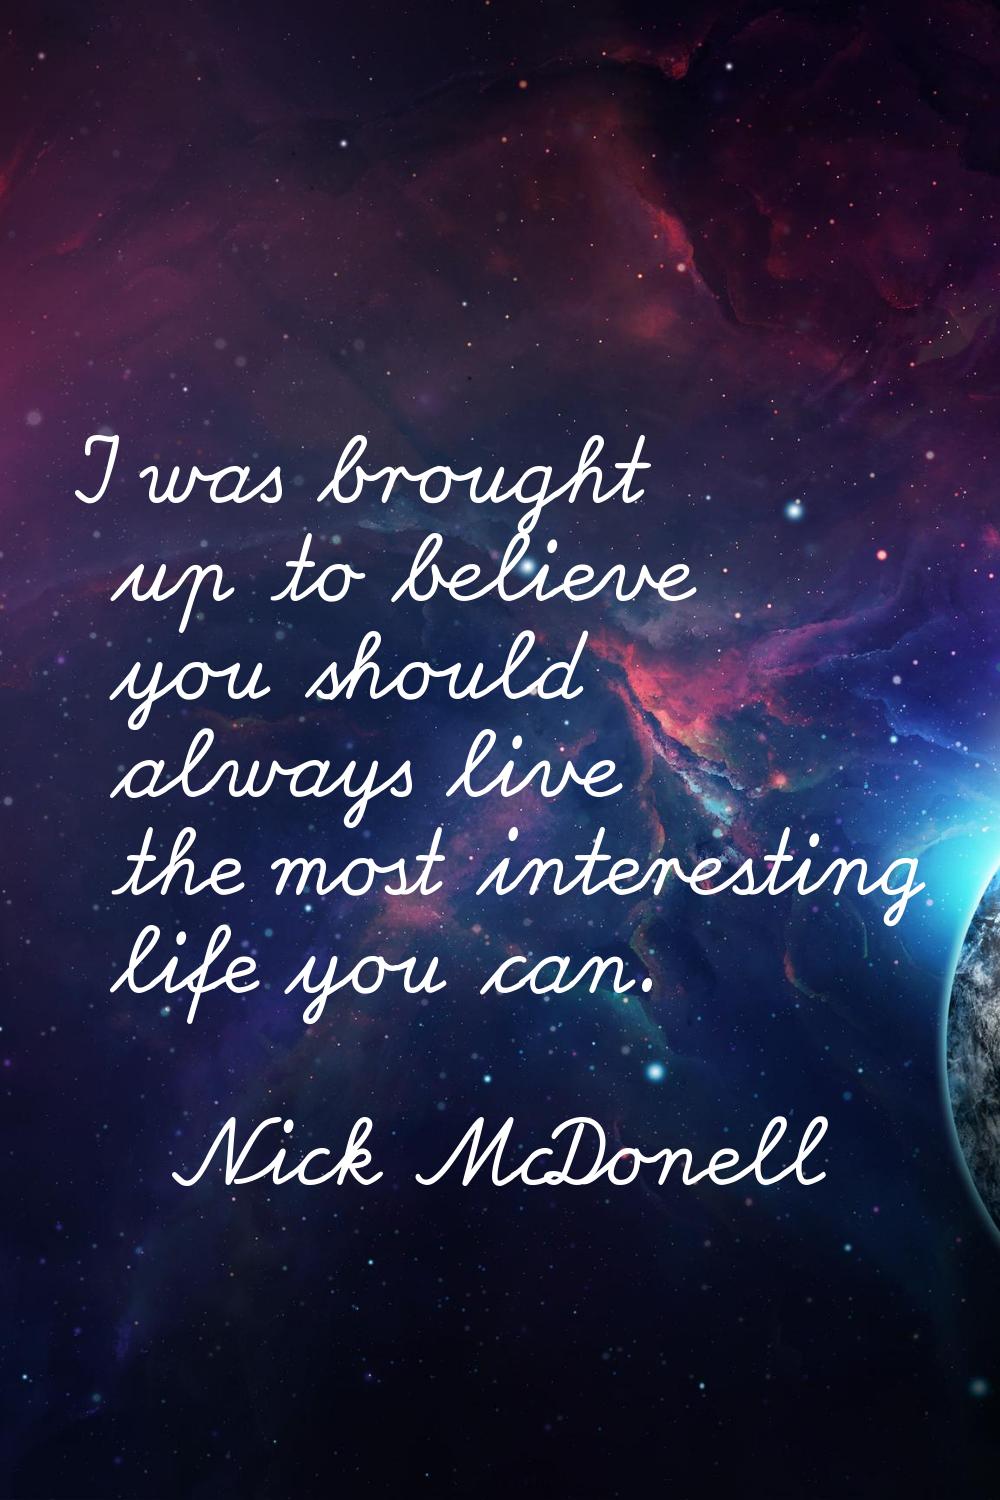 I was brought up to believe you should always live the most interesting life you can.